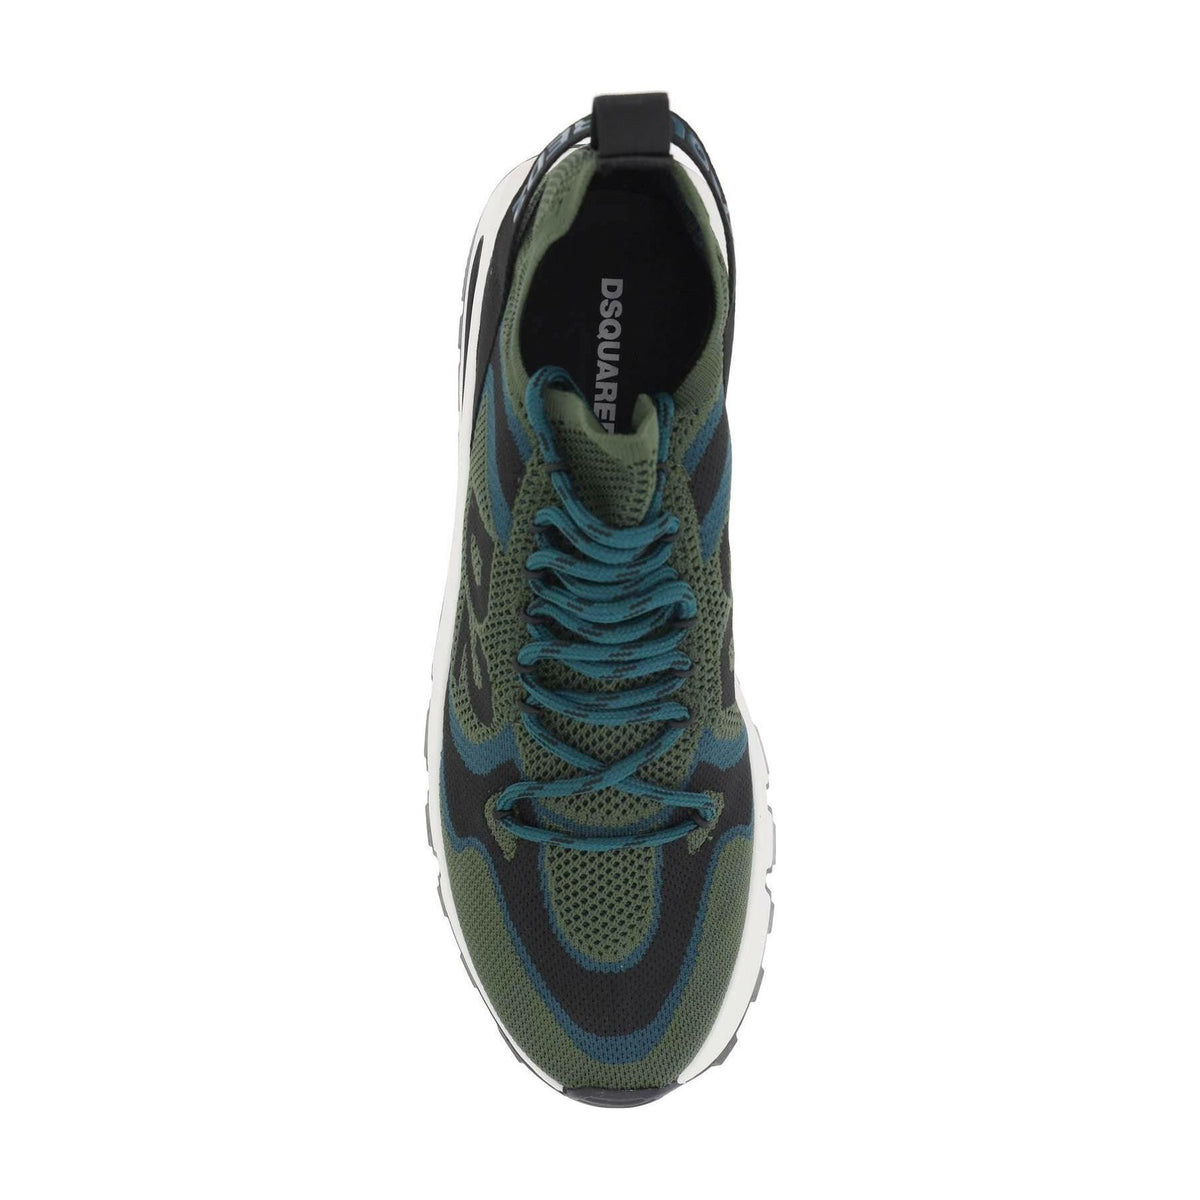 DSQUARED2 - Military Teal Black Recycled Fabric Run Ds2 Sneakers - JOHN JULIA